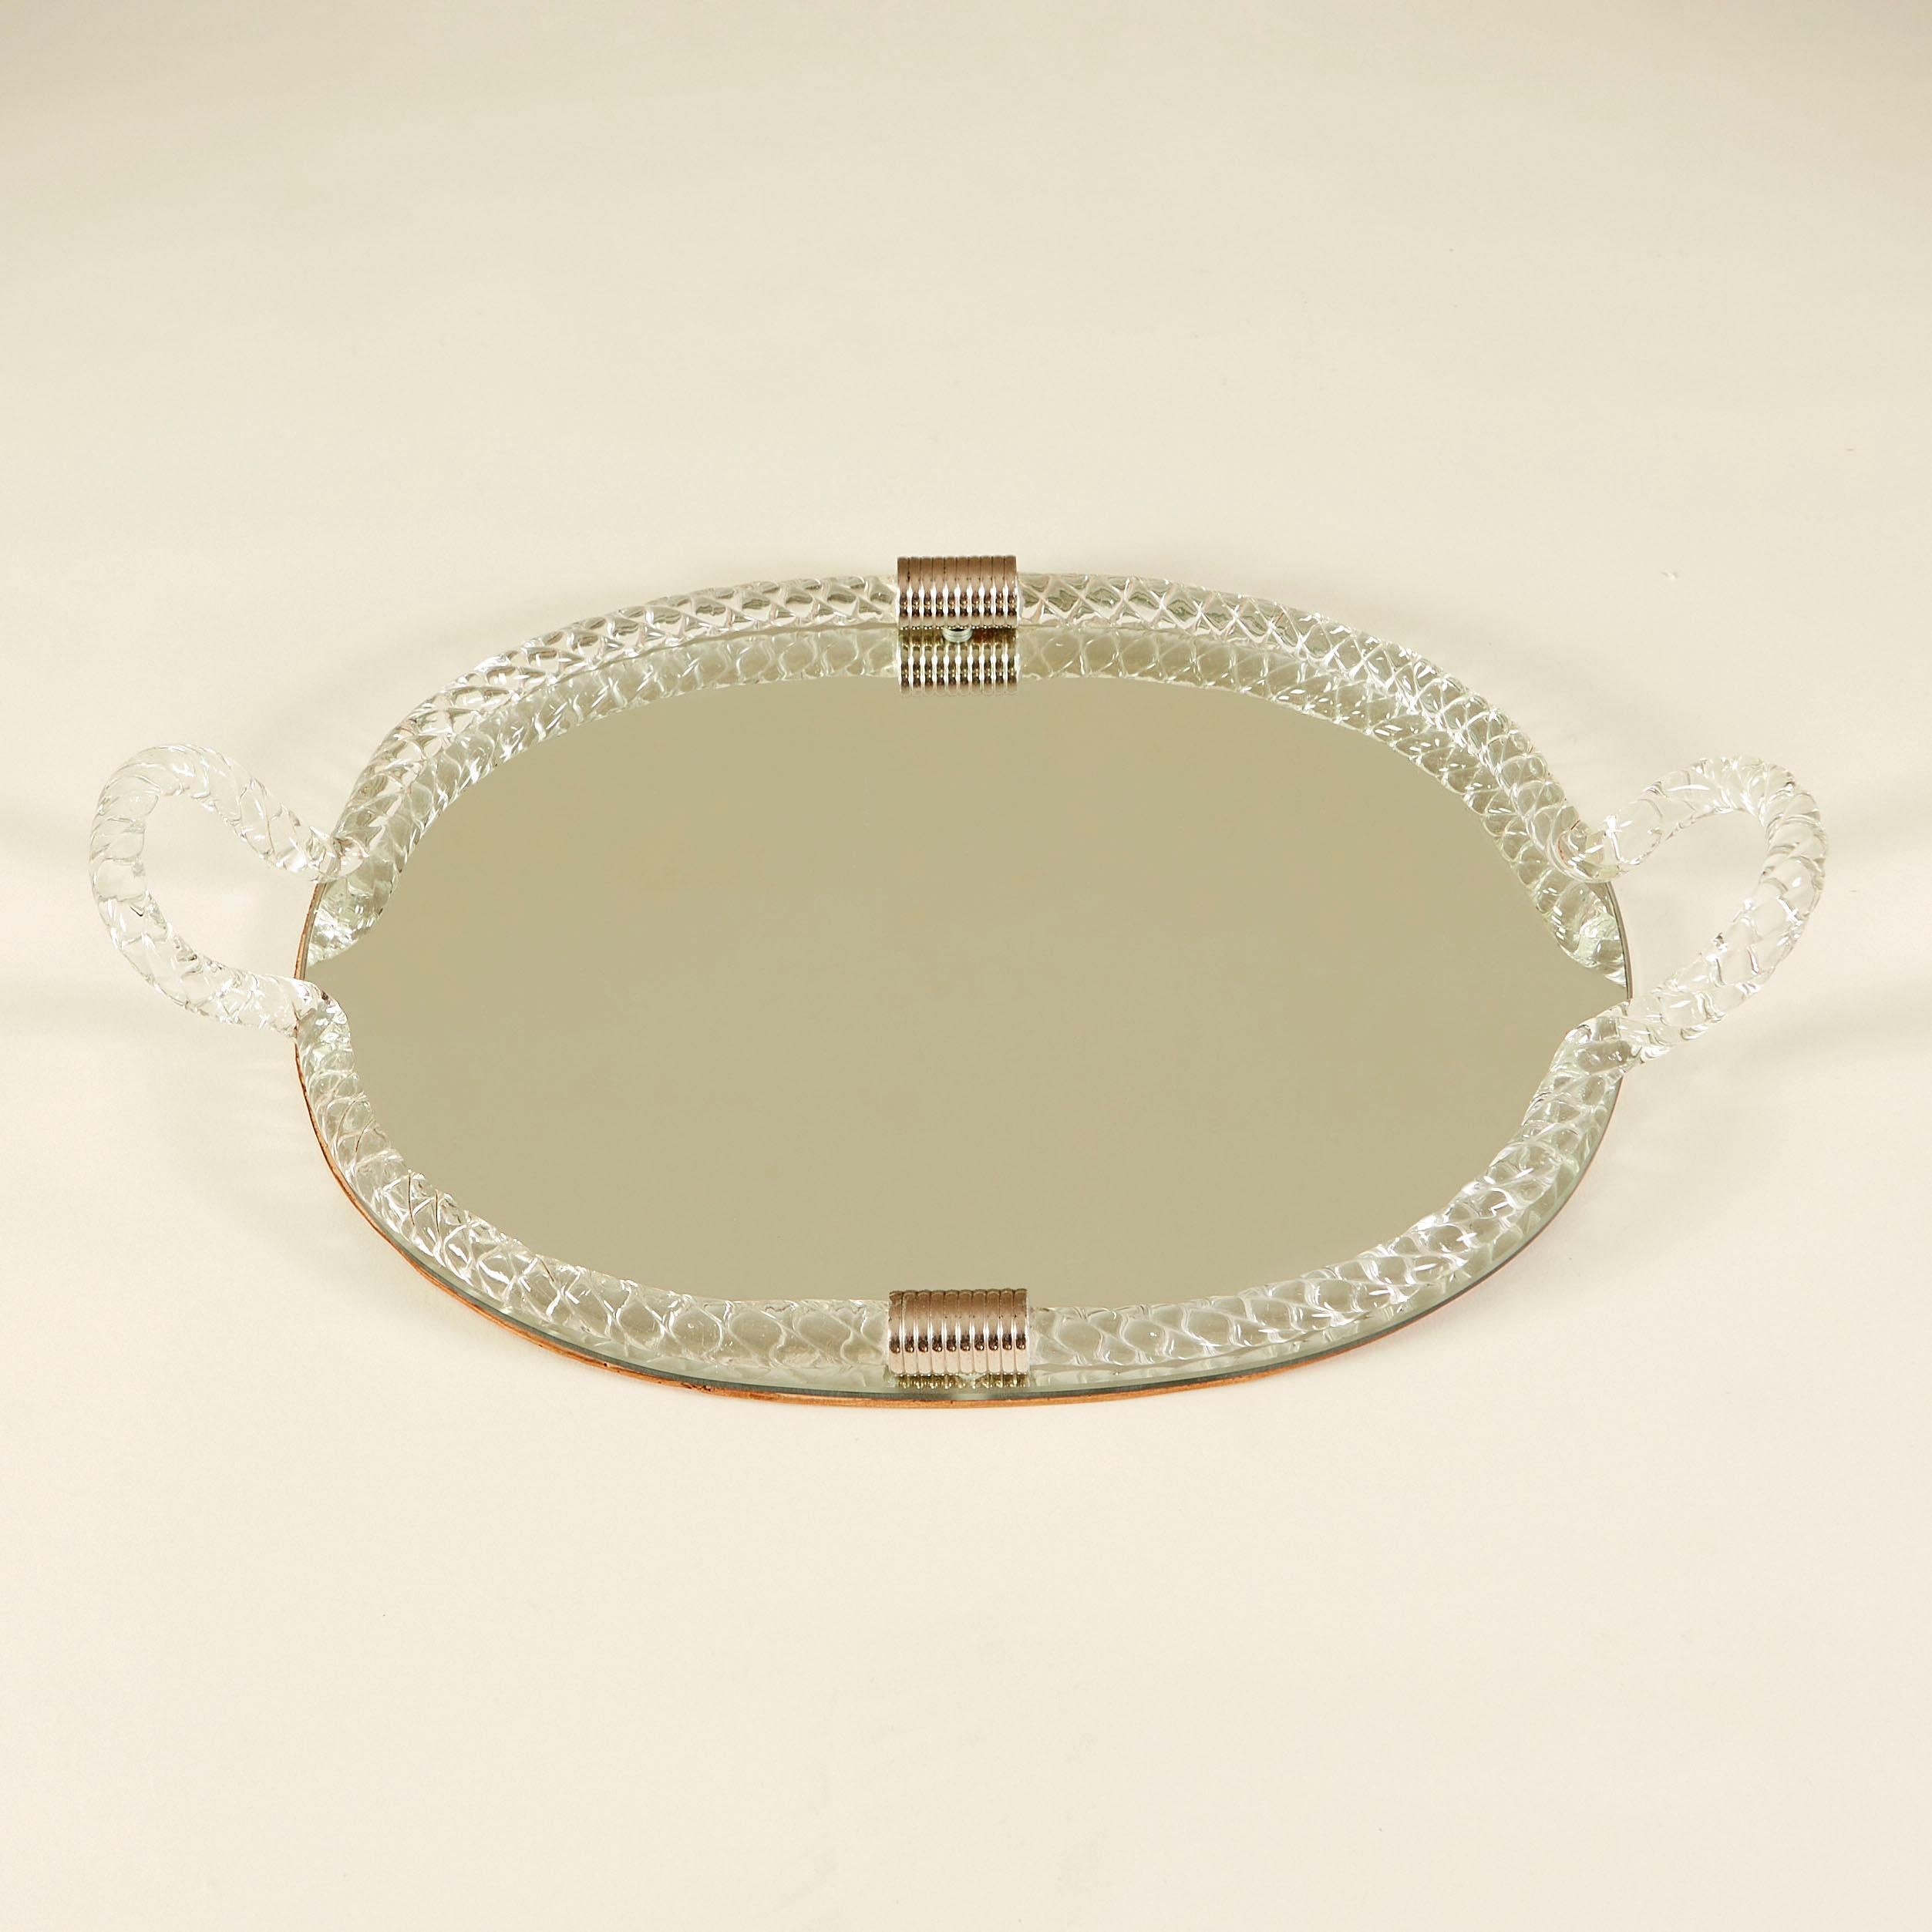 Unusual large oval tray with Murano glass rope frame and handles. Decorated with two chrome ribbed metal clasps. Mirrored top sits on rosewood base. Perfect for the dressing-table or chic bar display.
 